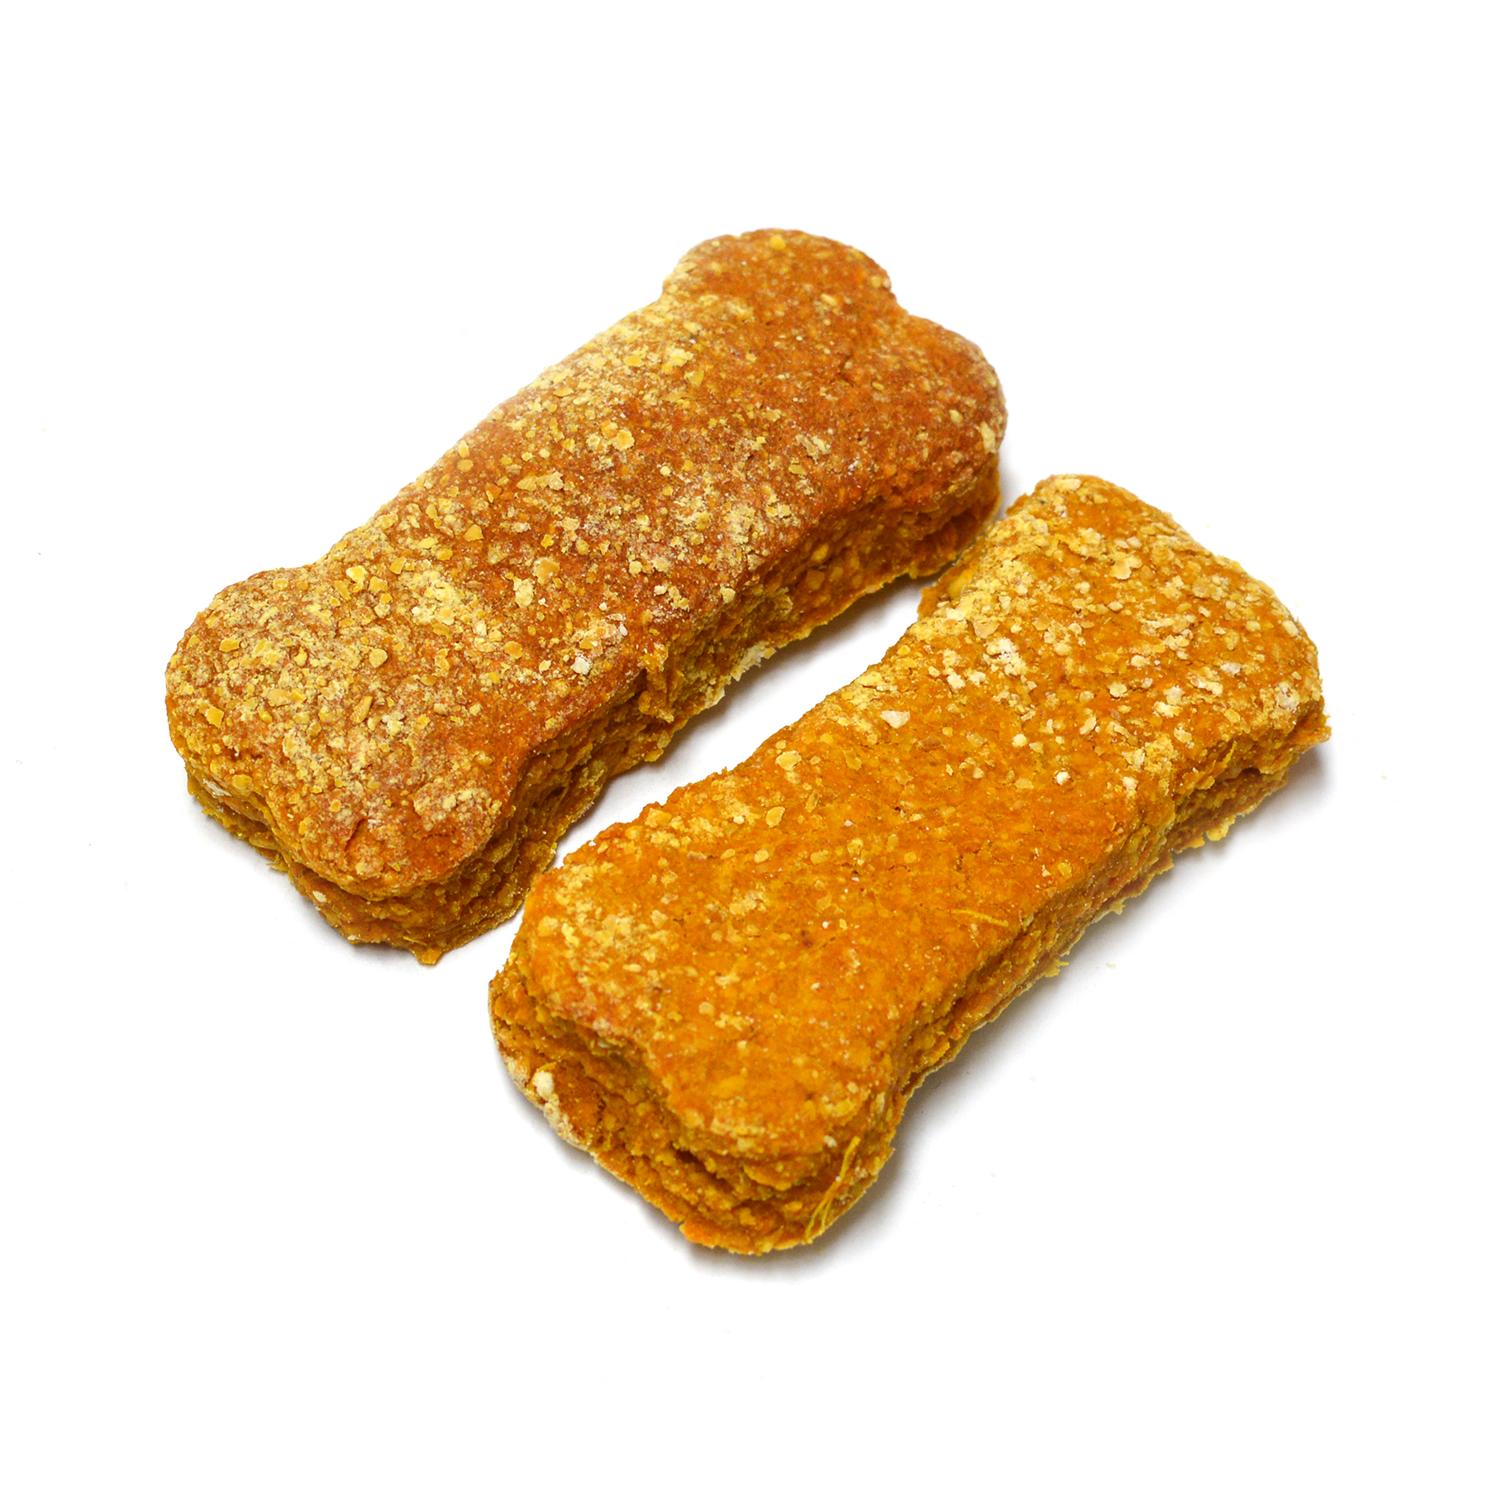 Two Booster Sweet Potato, Peanut Butter and Turmeric vegan bone shaped dog biscuits